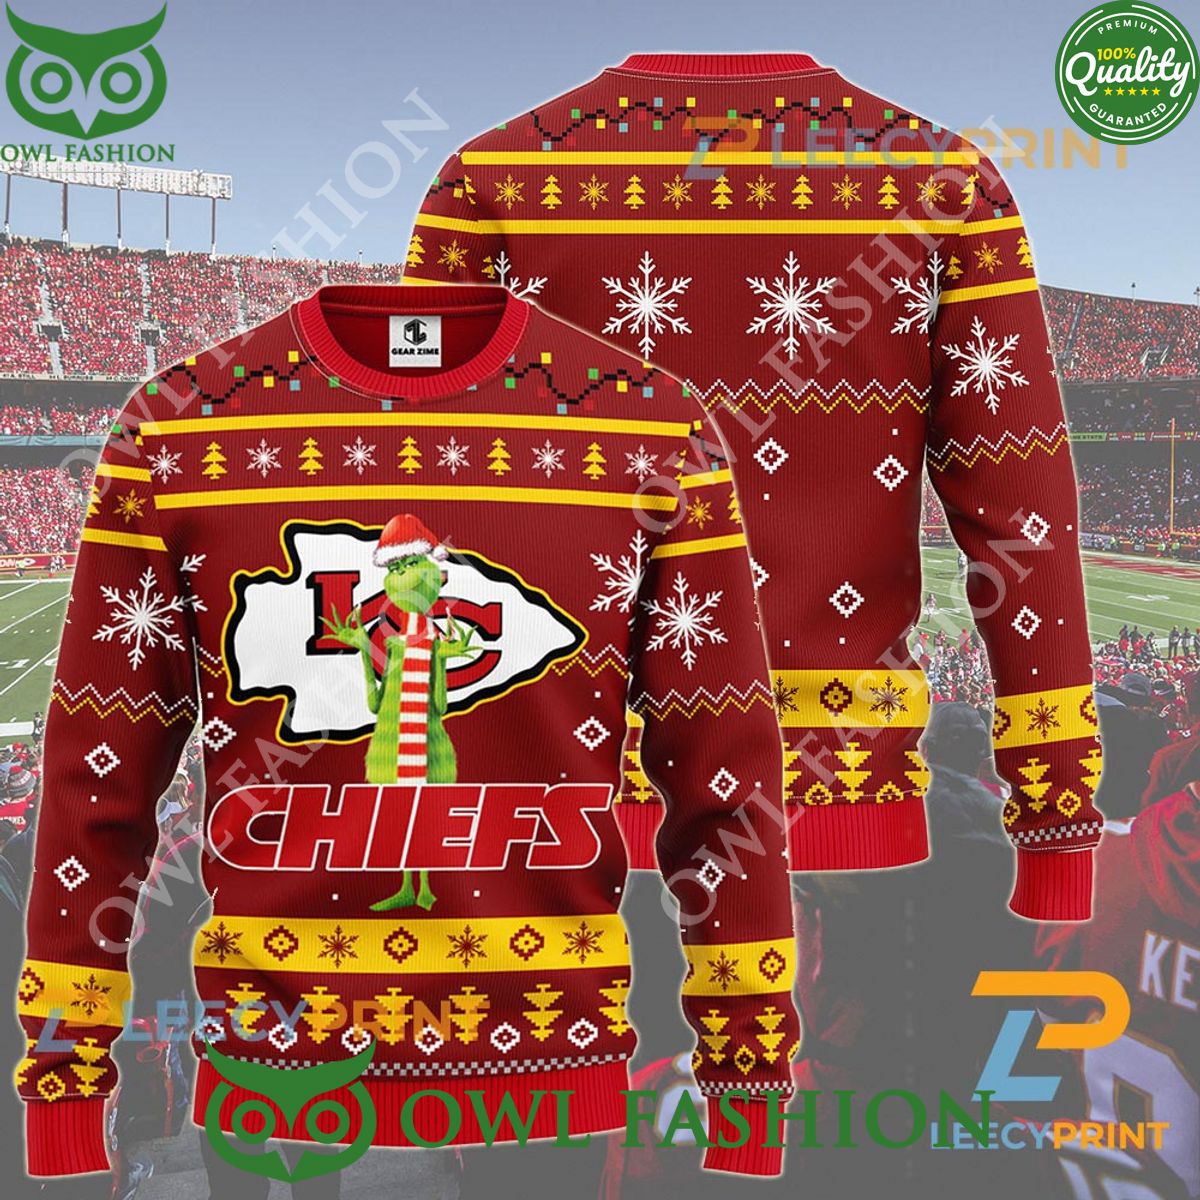 grinch stole christmas nfl kansas city chiefs funny christmas ugly sweater jumper 1 KMOTO.jpg